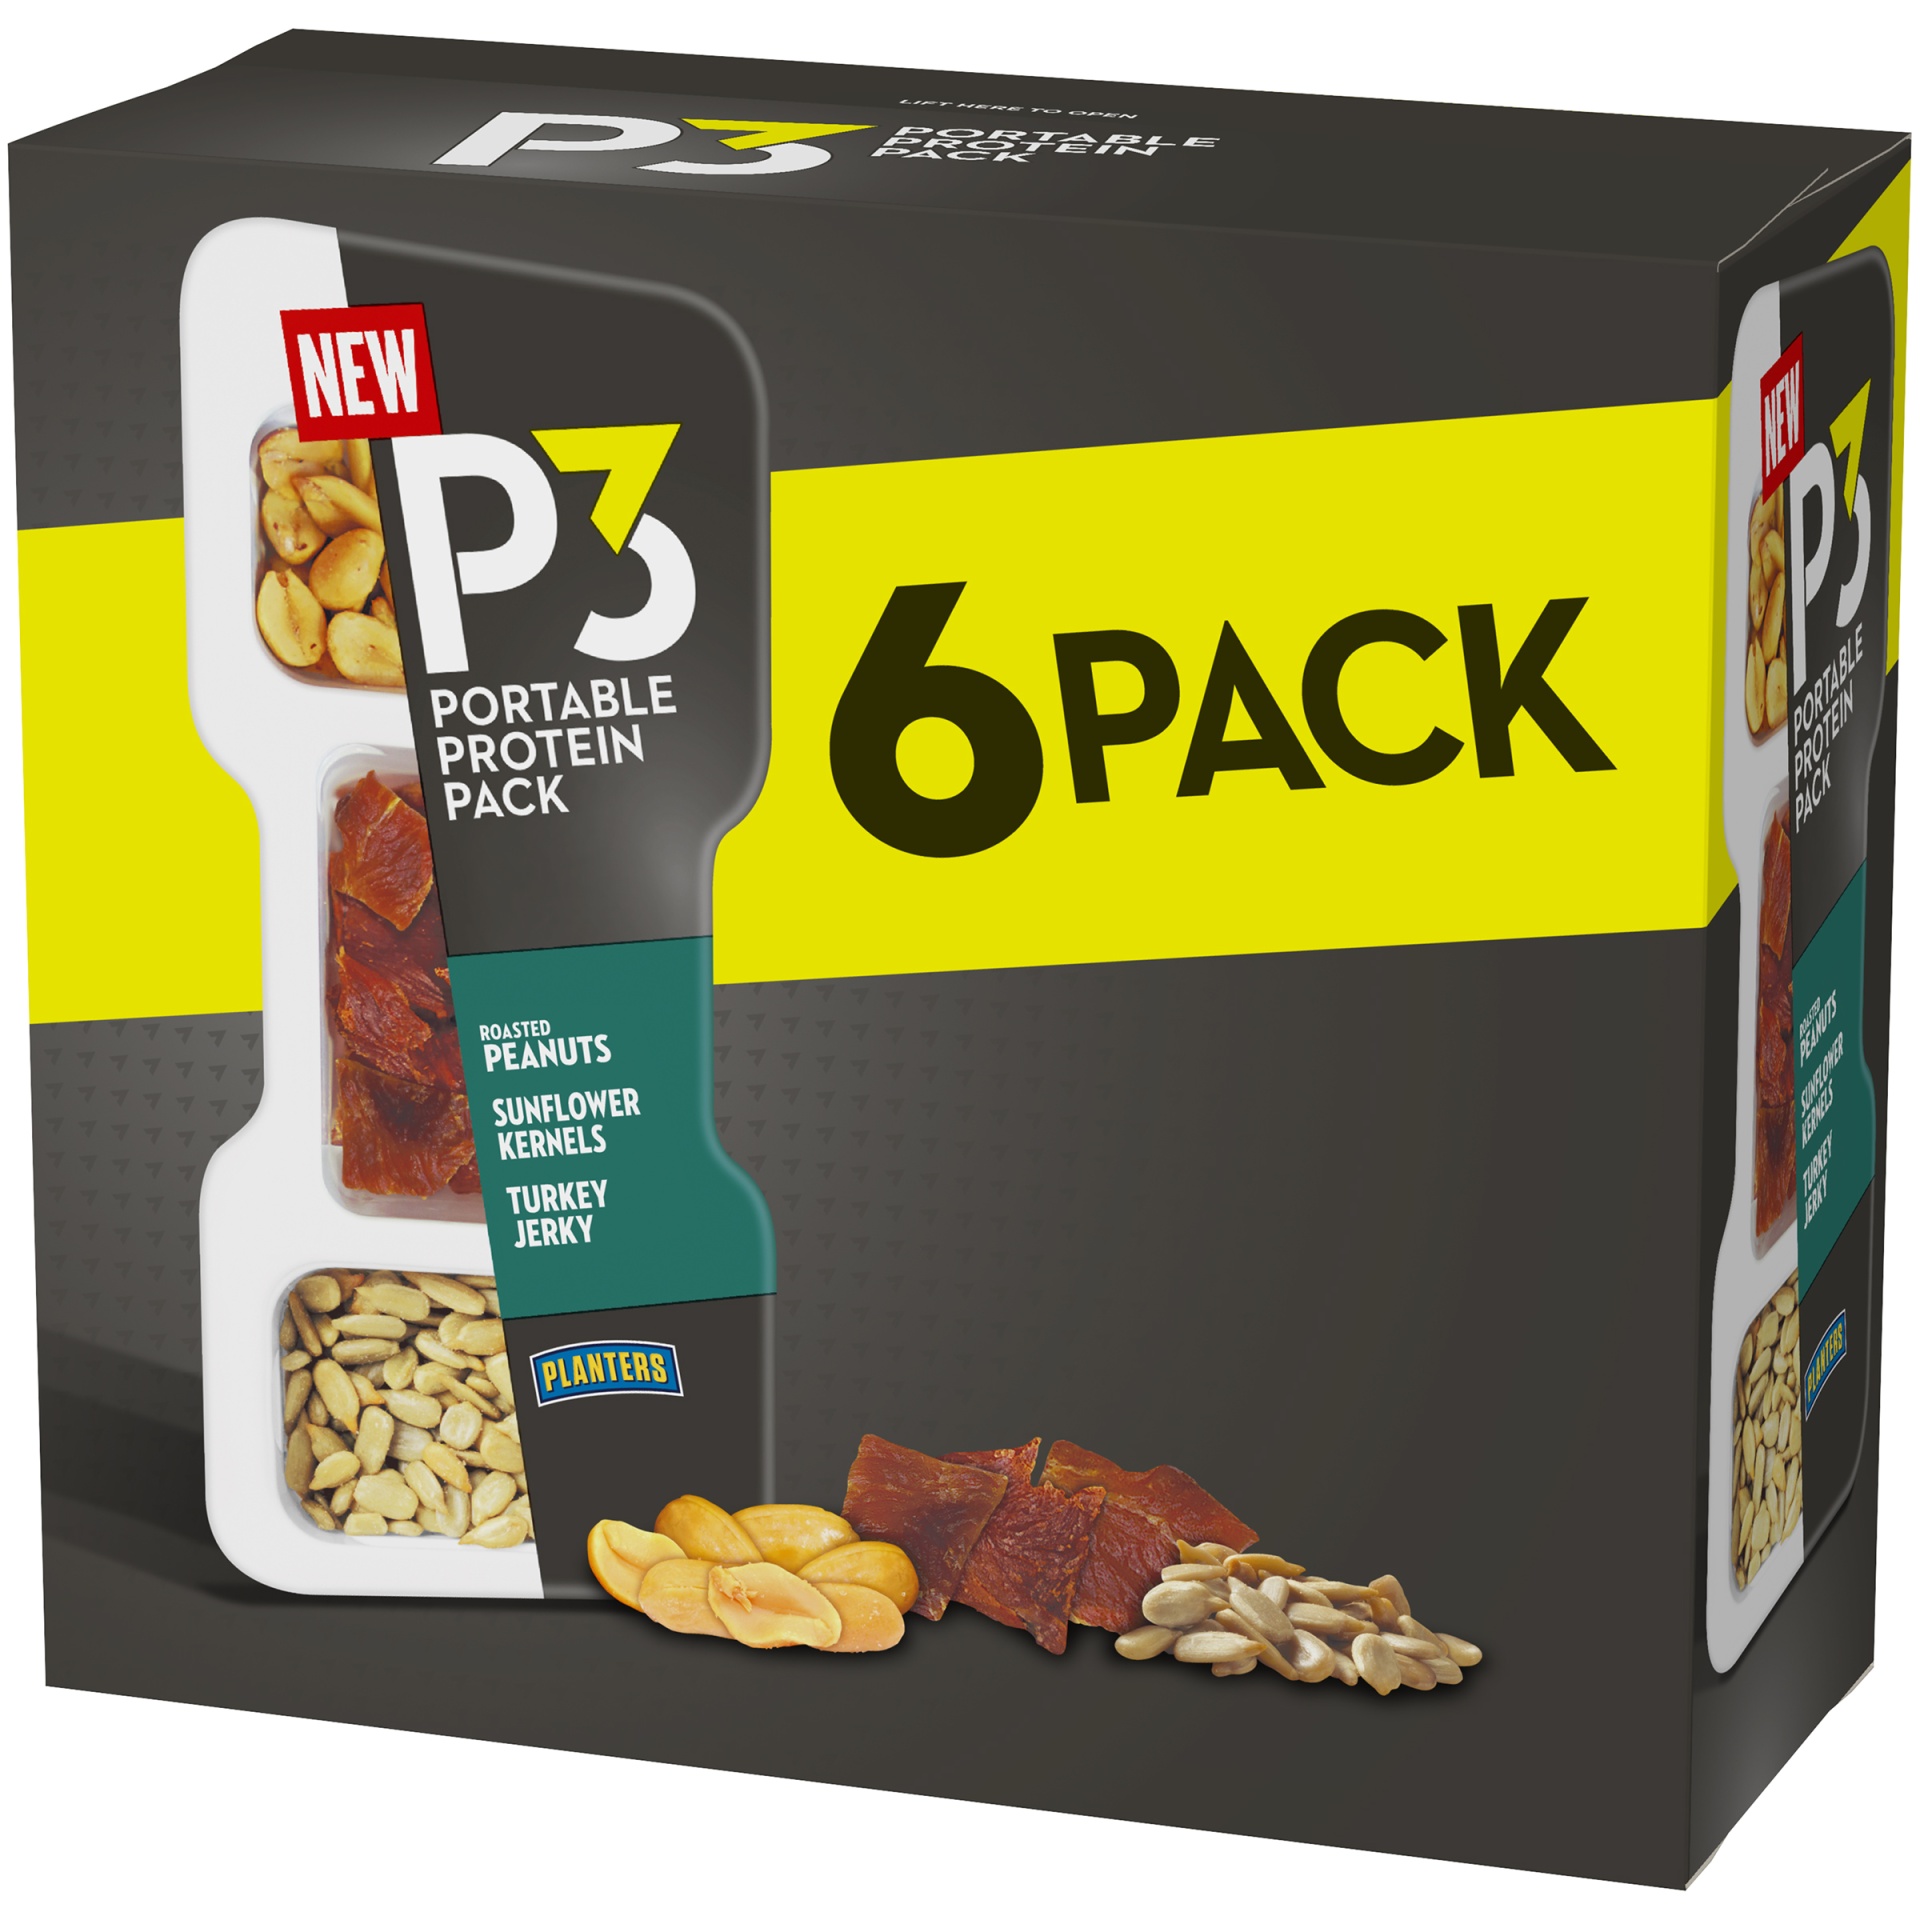 slide 3 of 4, P3 Portable Protein Snack Pack with Roasted Peanuts, Sunflower Kernels & Turkey Jerky Trays, 6 ct